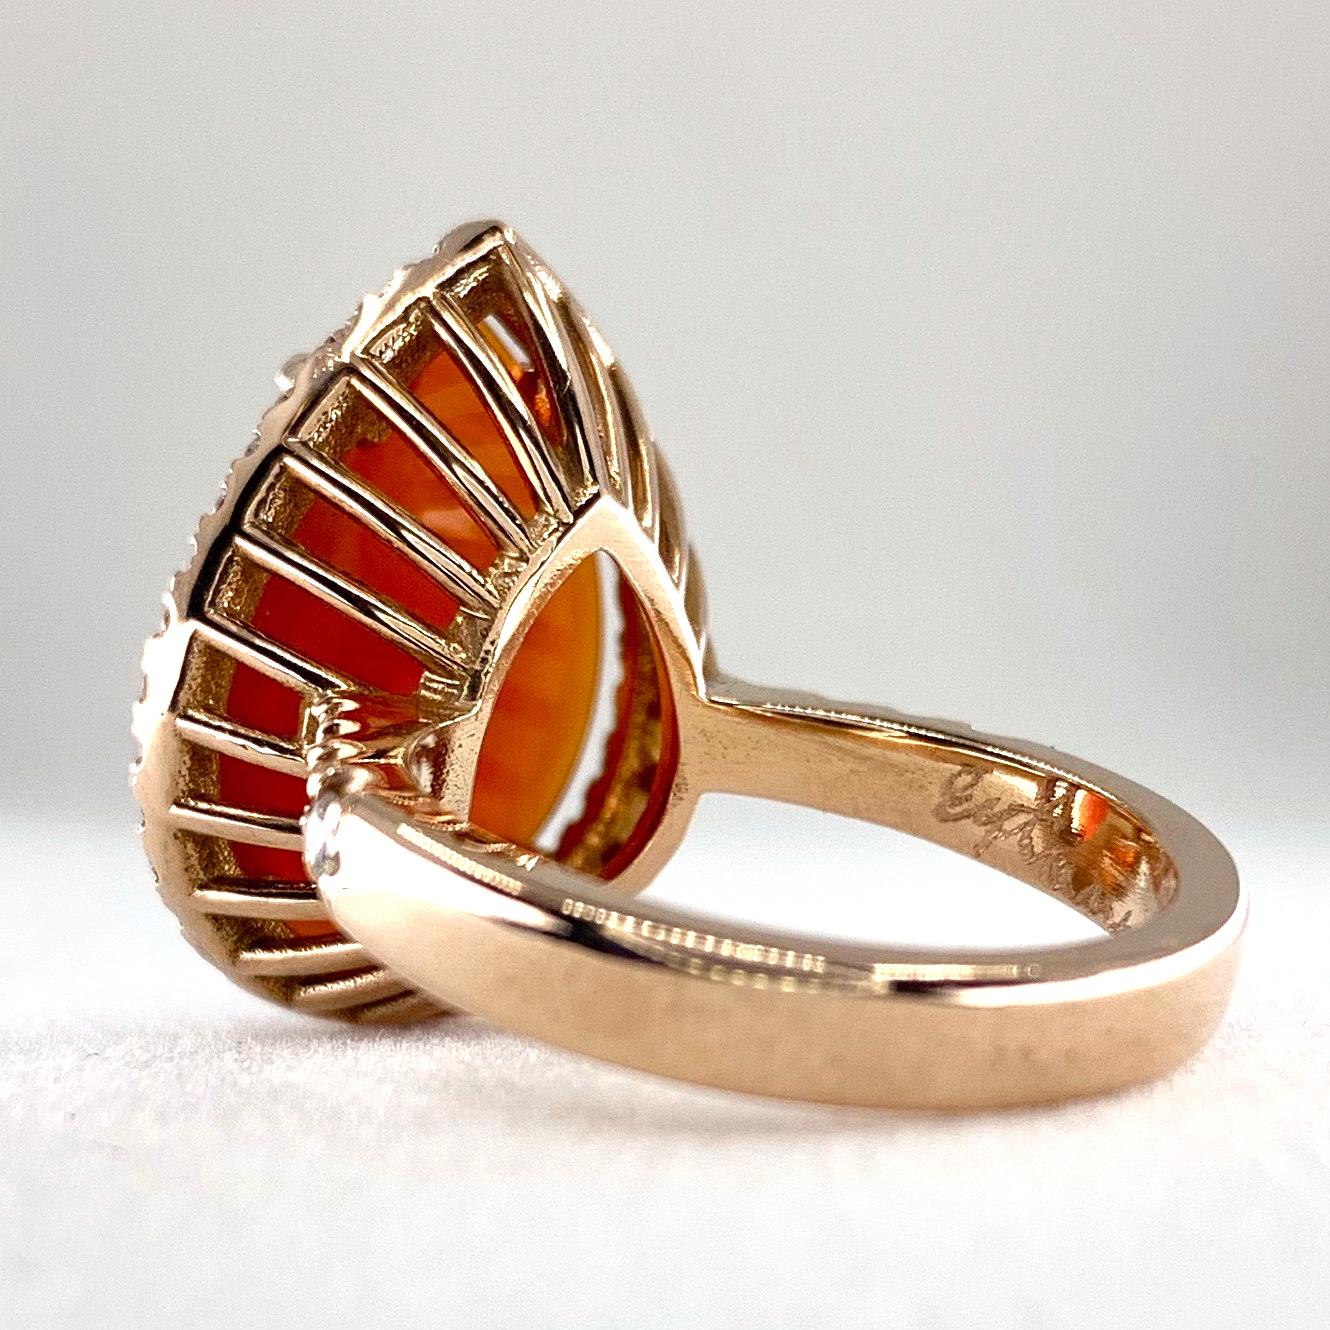 Faceted 4.0 Carat Carnelian Slice Pear-Shaped Diamond Halo Ring in Rose Gold 1